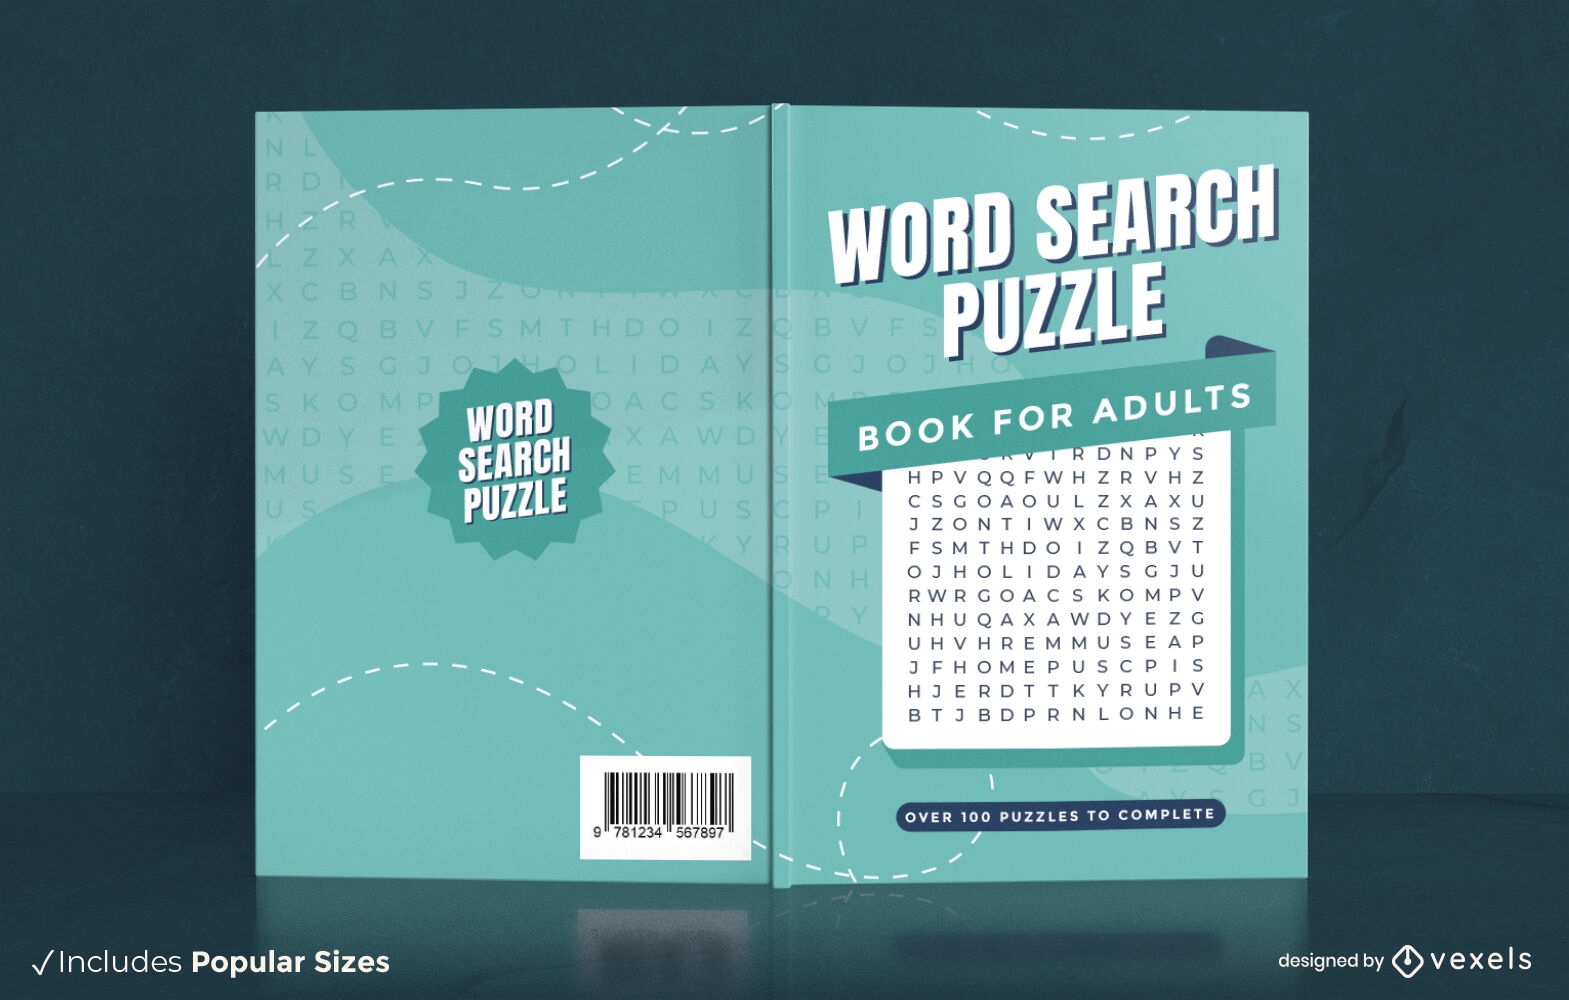 Word search puzzle for adults book cover design